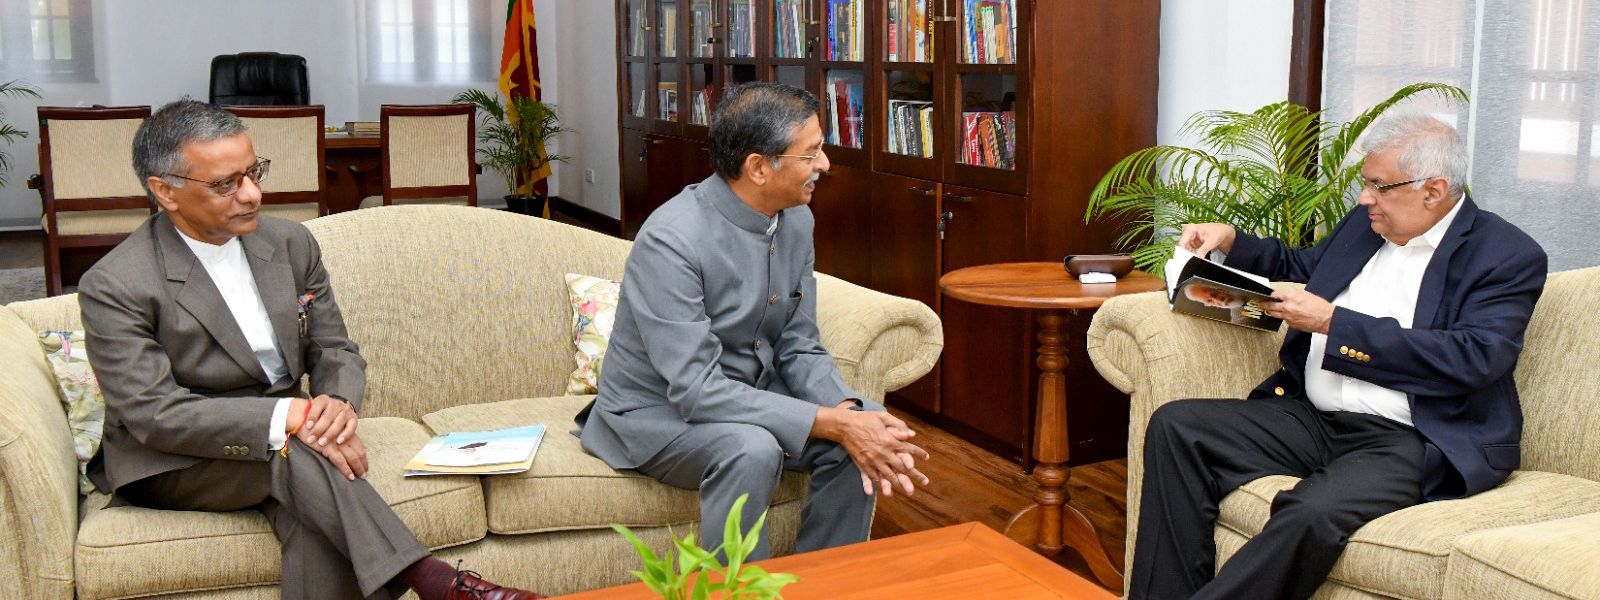 President seeks India's help with Governance